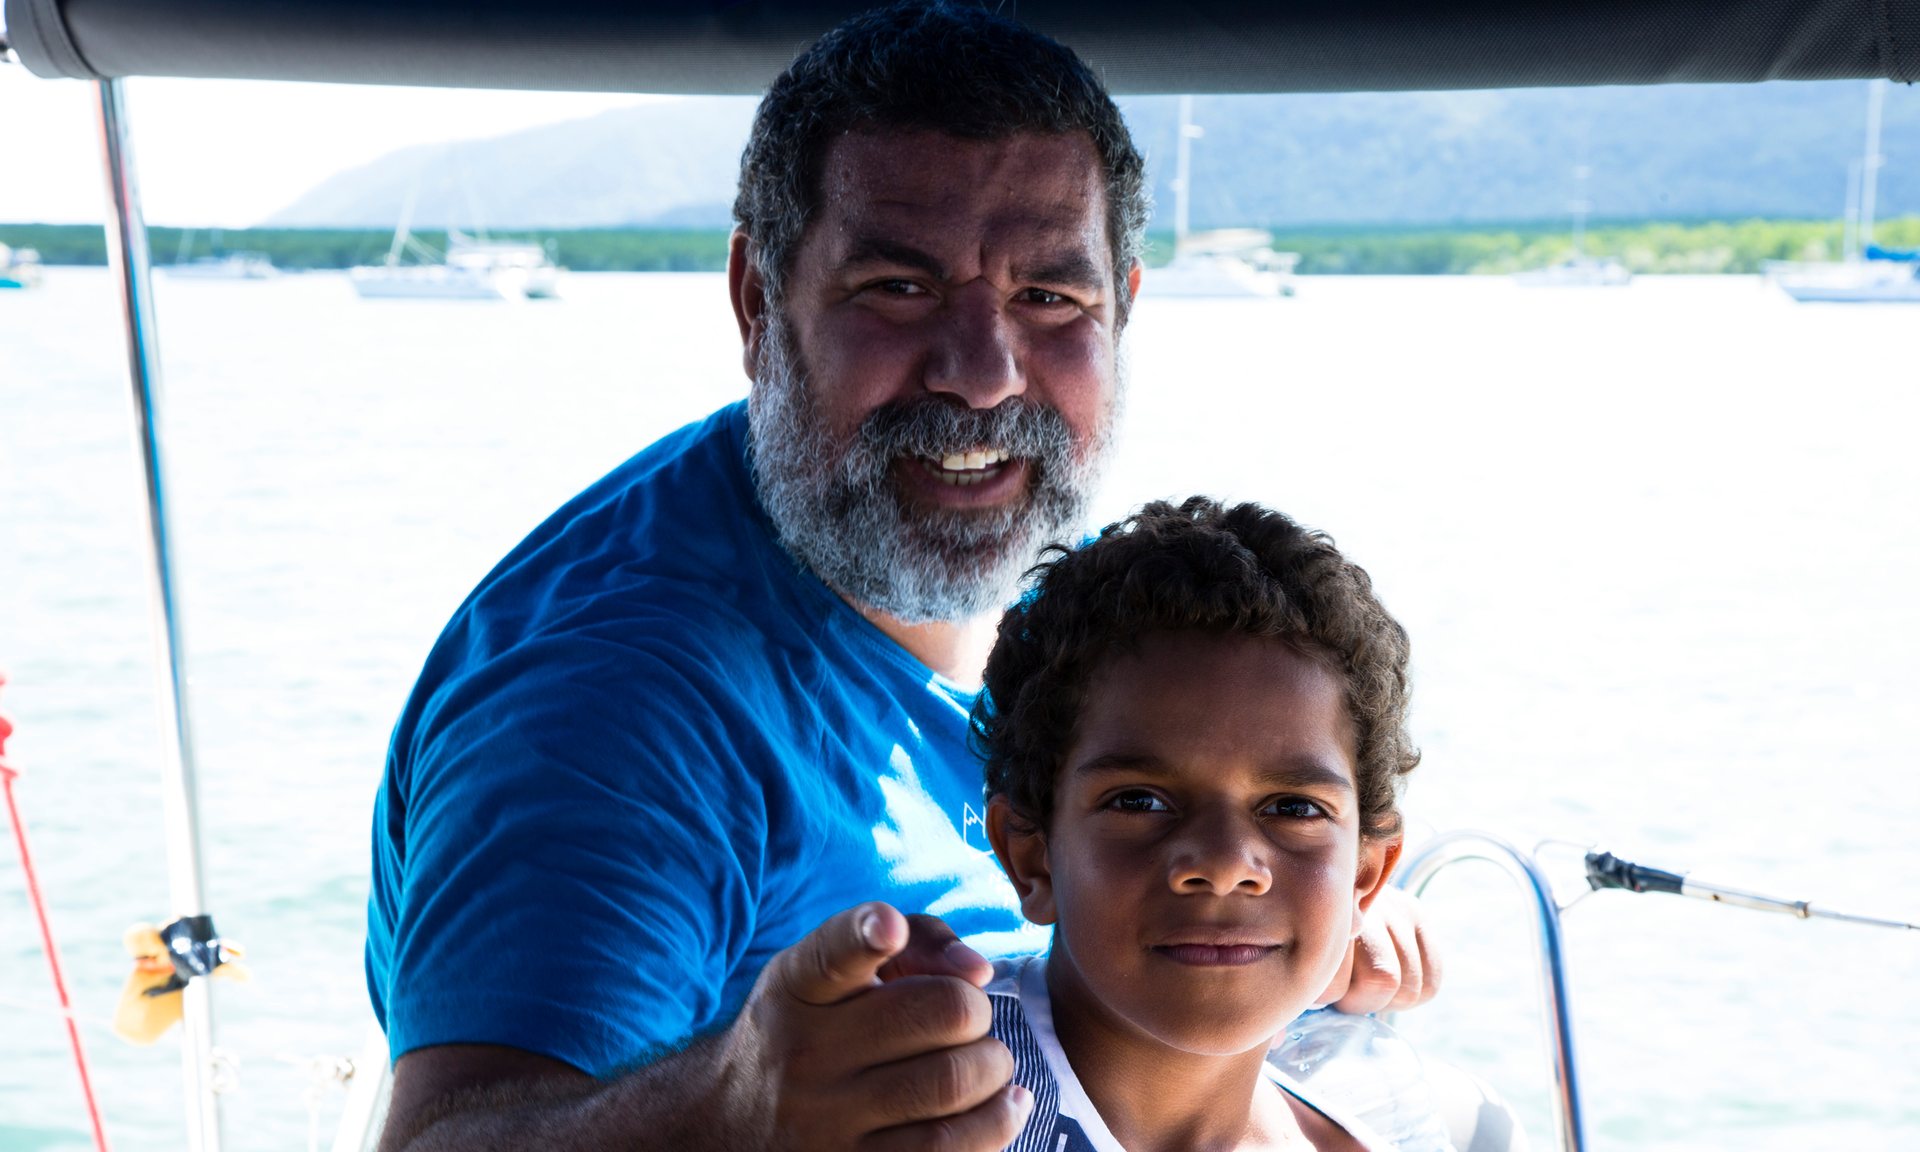 Murrumu: one man’s mission to create a sovereign Indigenous country inside Australia